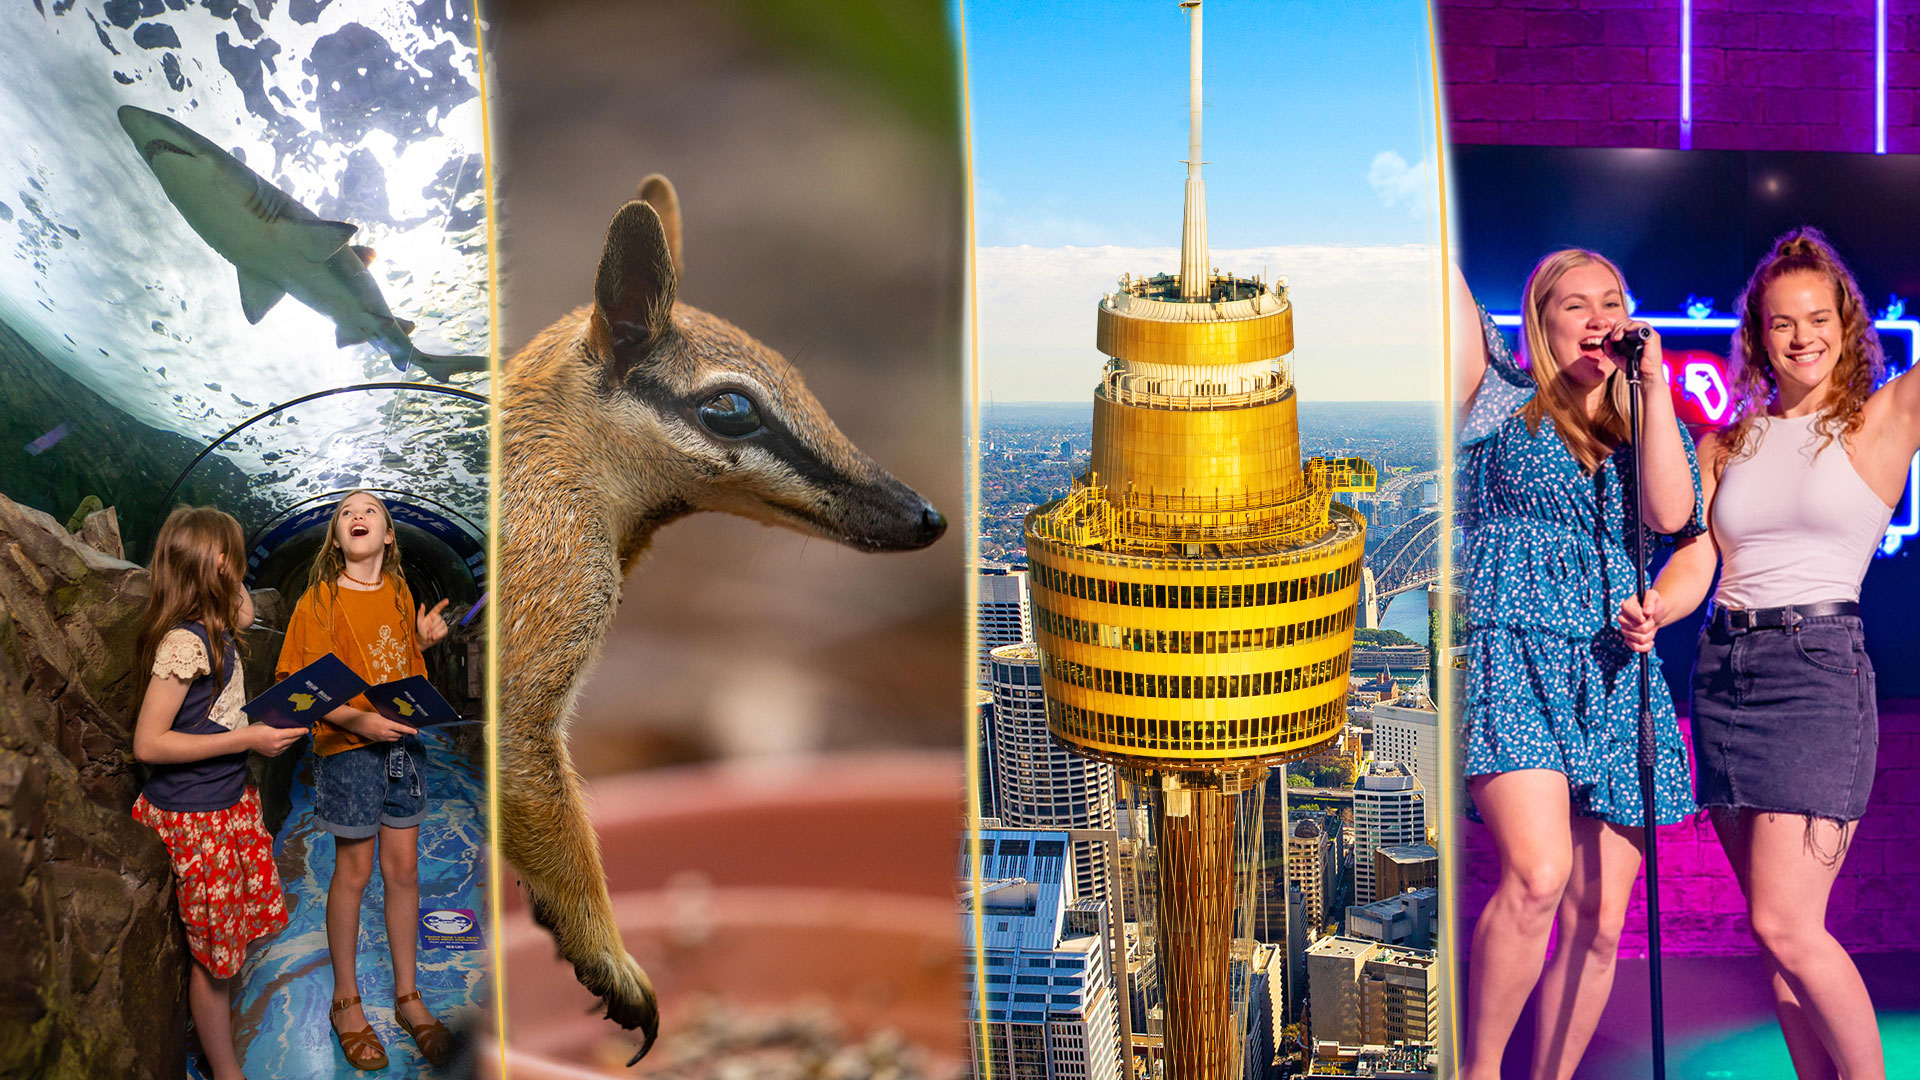 Sydney Attractions - visit all four must see Sydney attractions: SEA LIFE Aquarium, Wild Life Zoo, Sydney Tower, and Madame Tussauds - KKDay 9 Best Family Attractions in Sydney